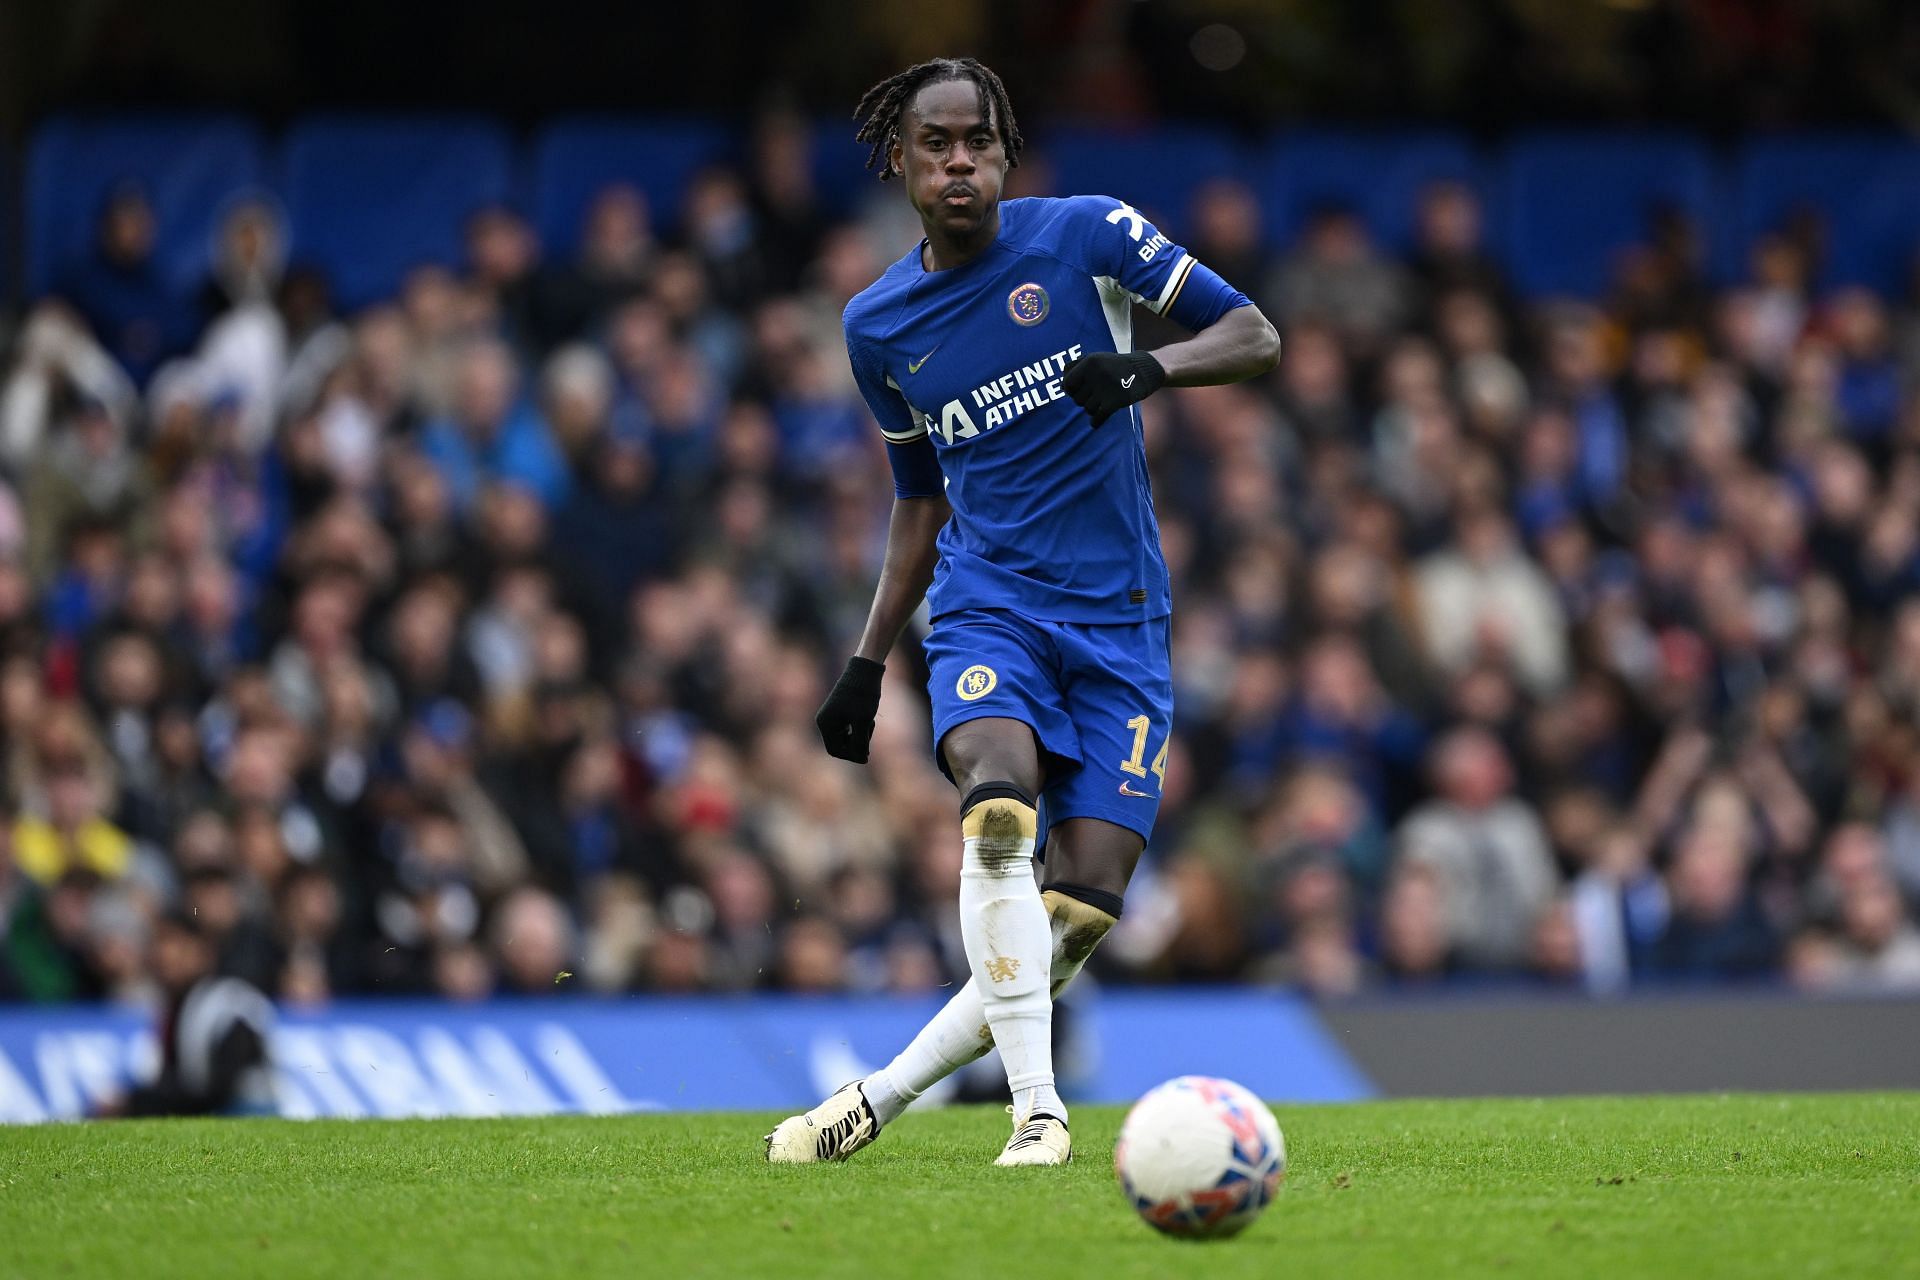 Trevoh Chalobah is likely to leave Stamford Bridge